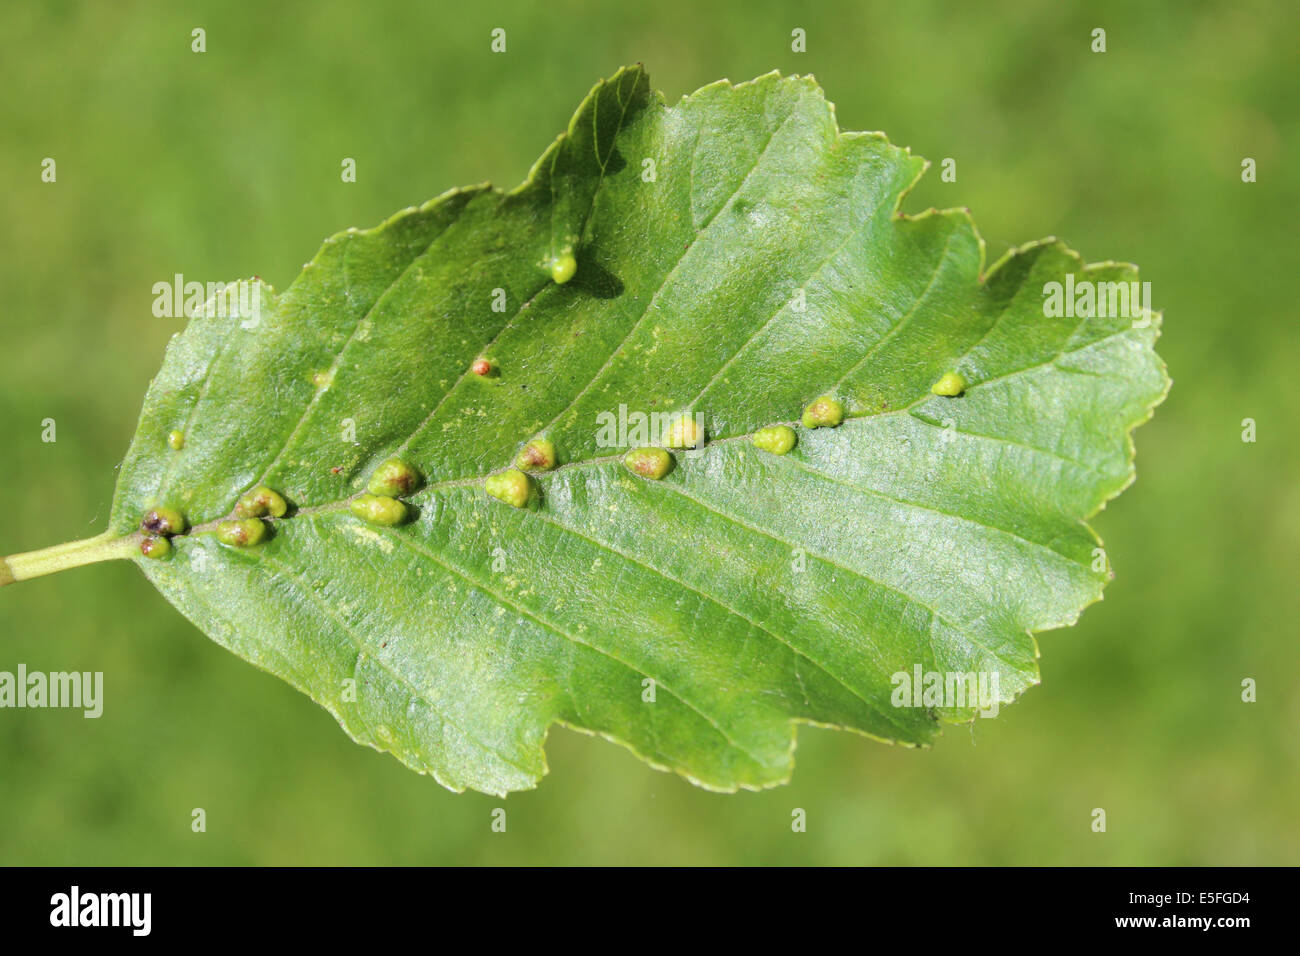 Galls Beside Midrib Of Alder Leaf Alnus glutinosa Caused By The Gall Mite Species Eriophyes inangulis Stock Photo